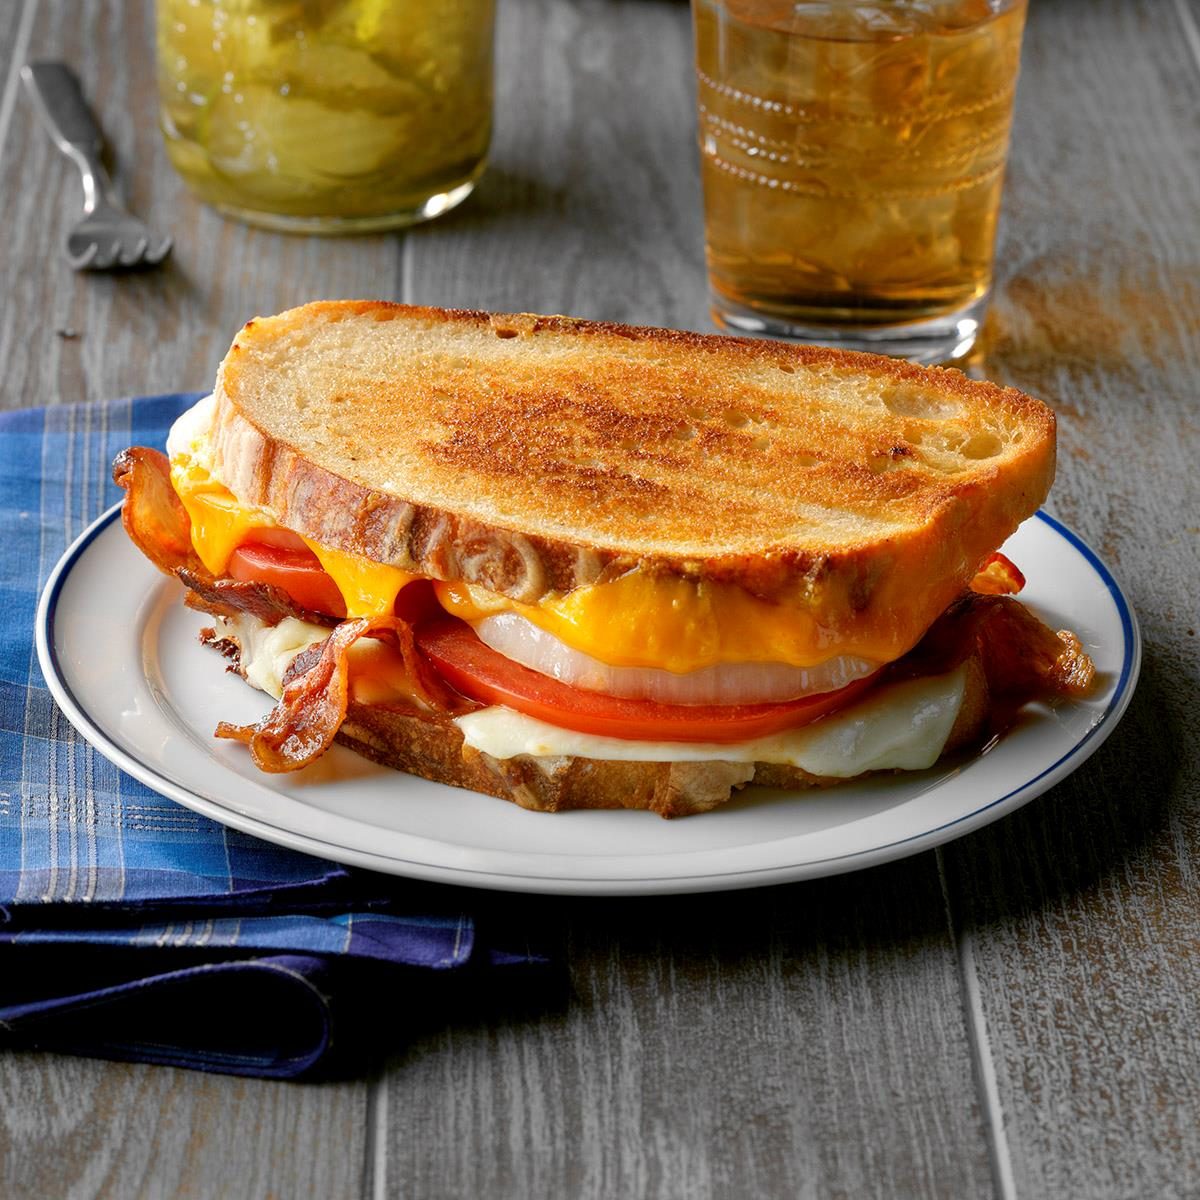 https://www.tasteofhome.com/wp-content/uploads/2018/01/Best-Ever-Grilled-Cheese-Sandwiches_EXPS_CF2BZ20_93316_B11_22_5b-4.jpg?fit=700%2C1024